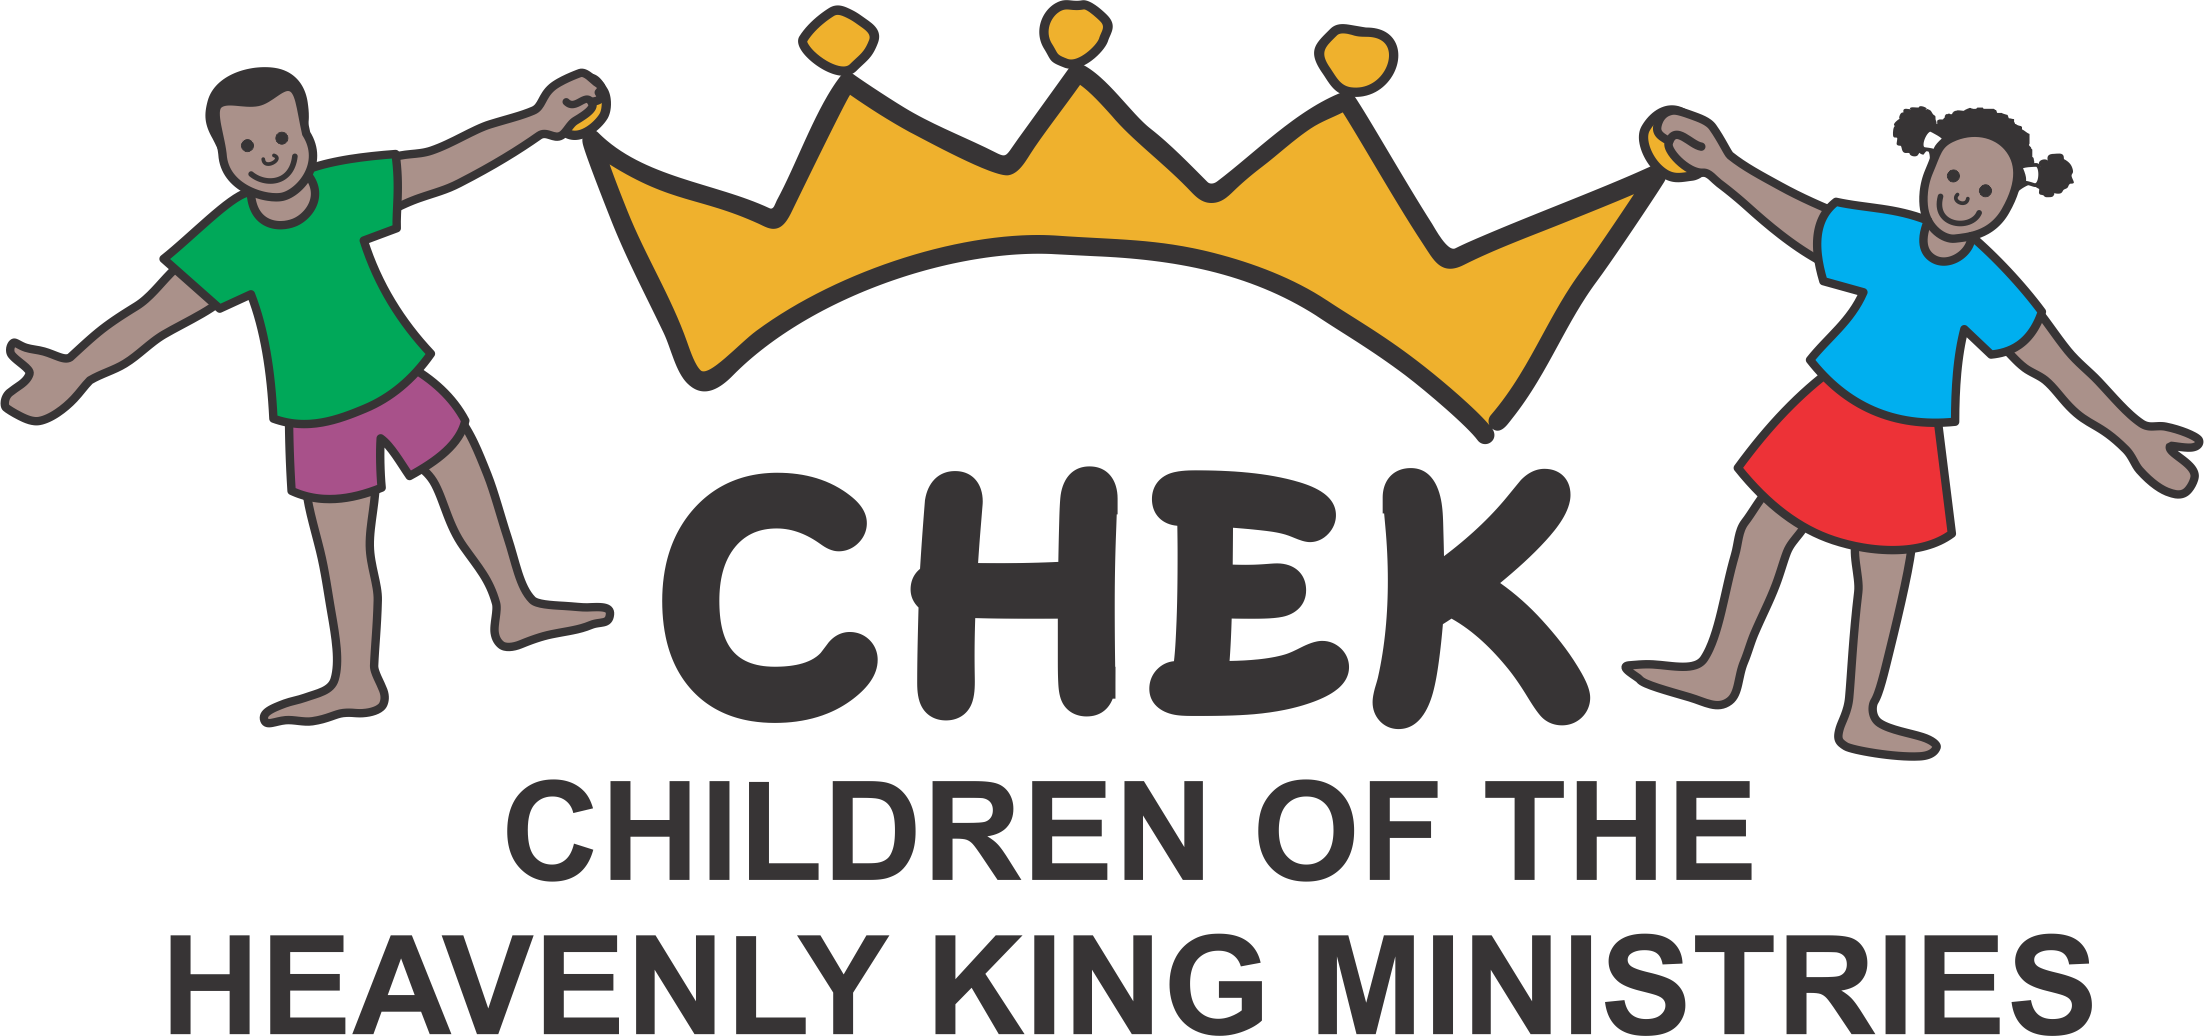 Children of the Heavenly King Ministries